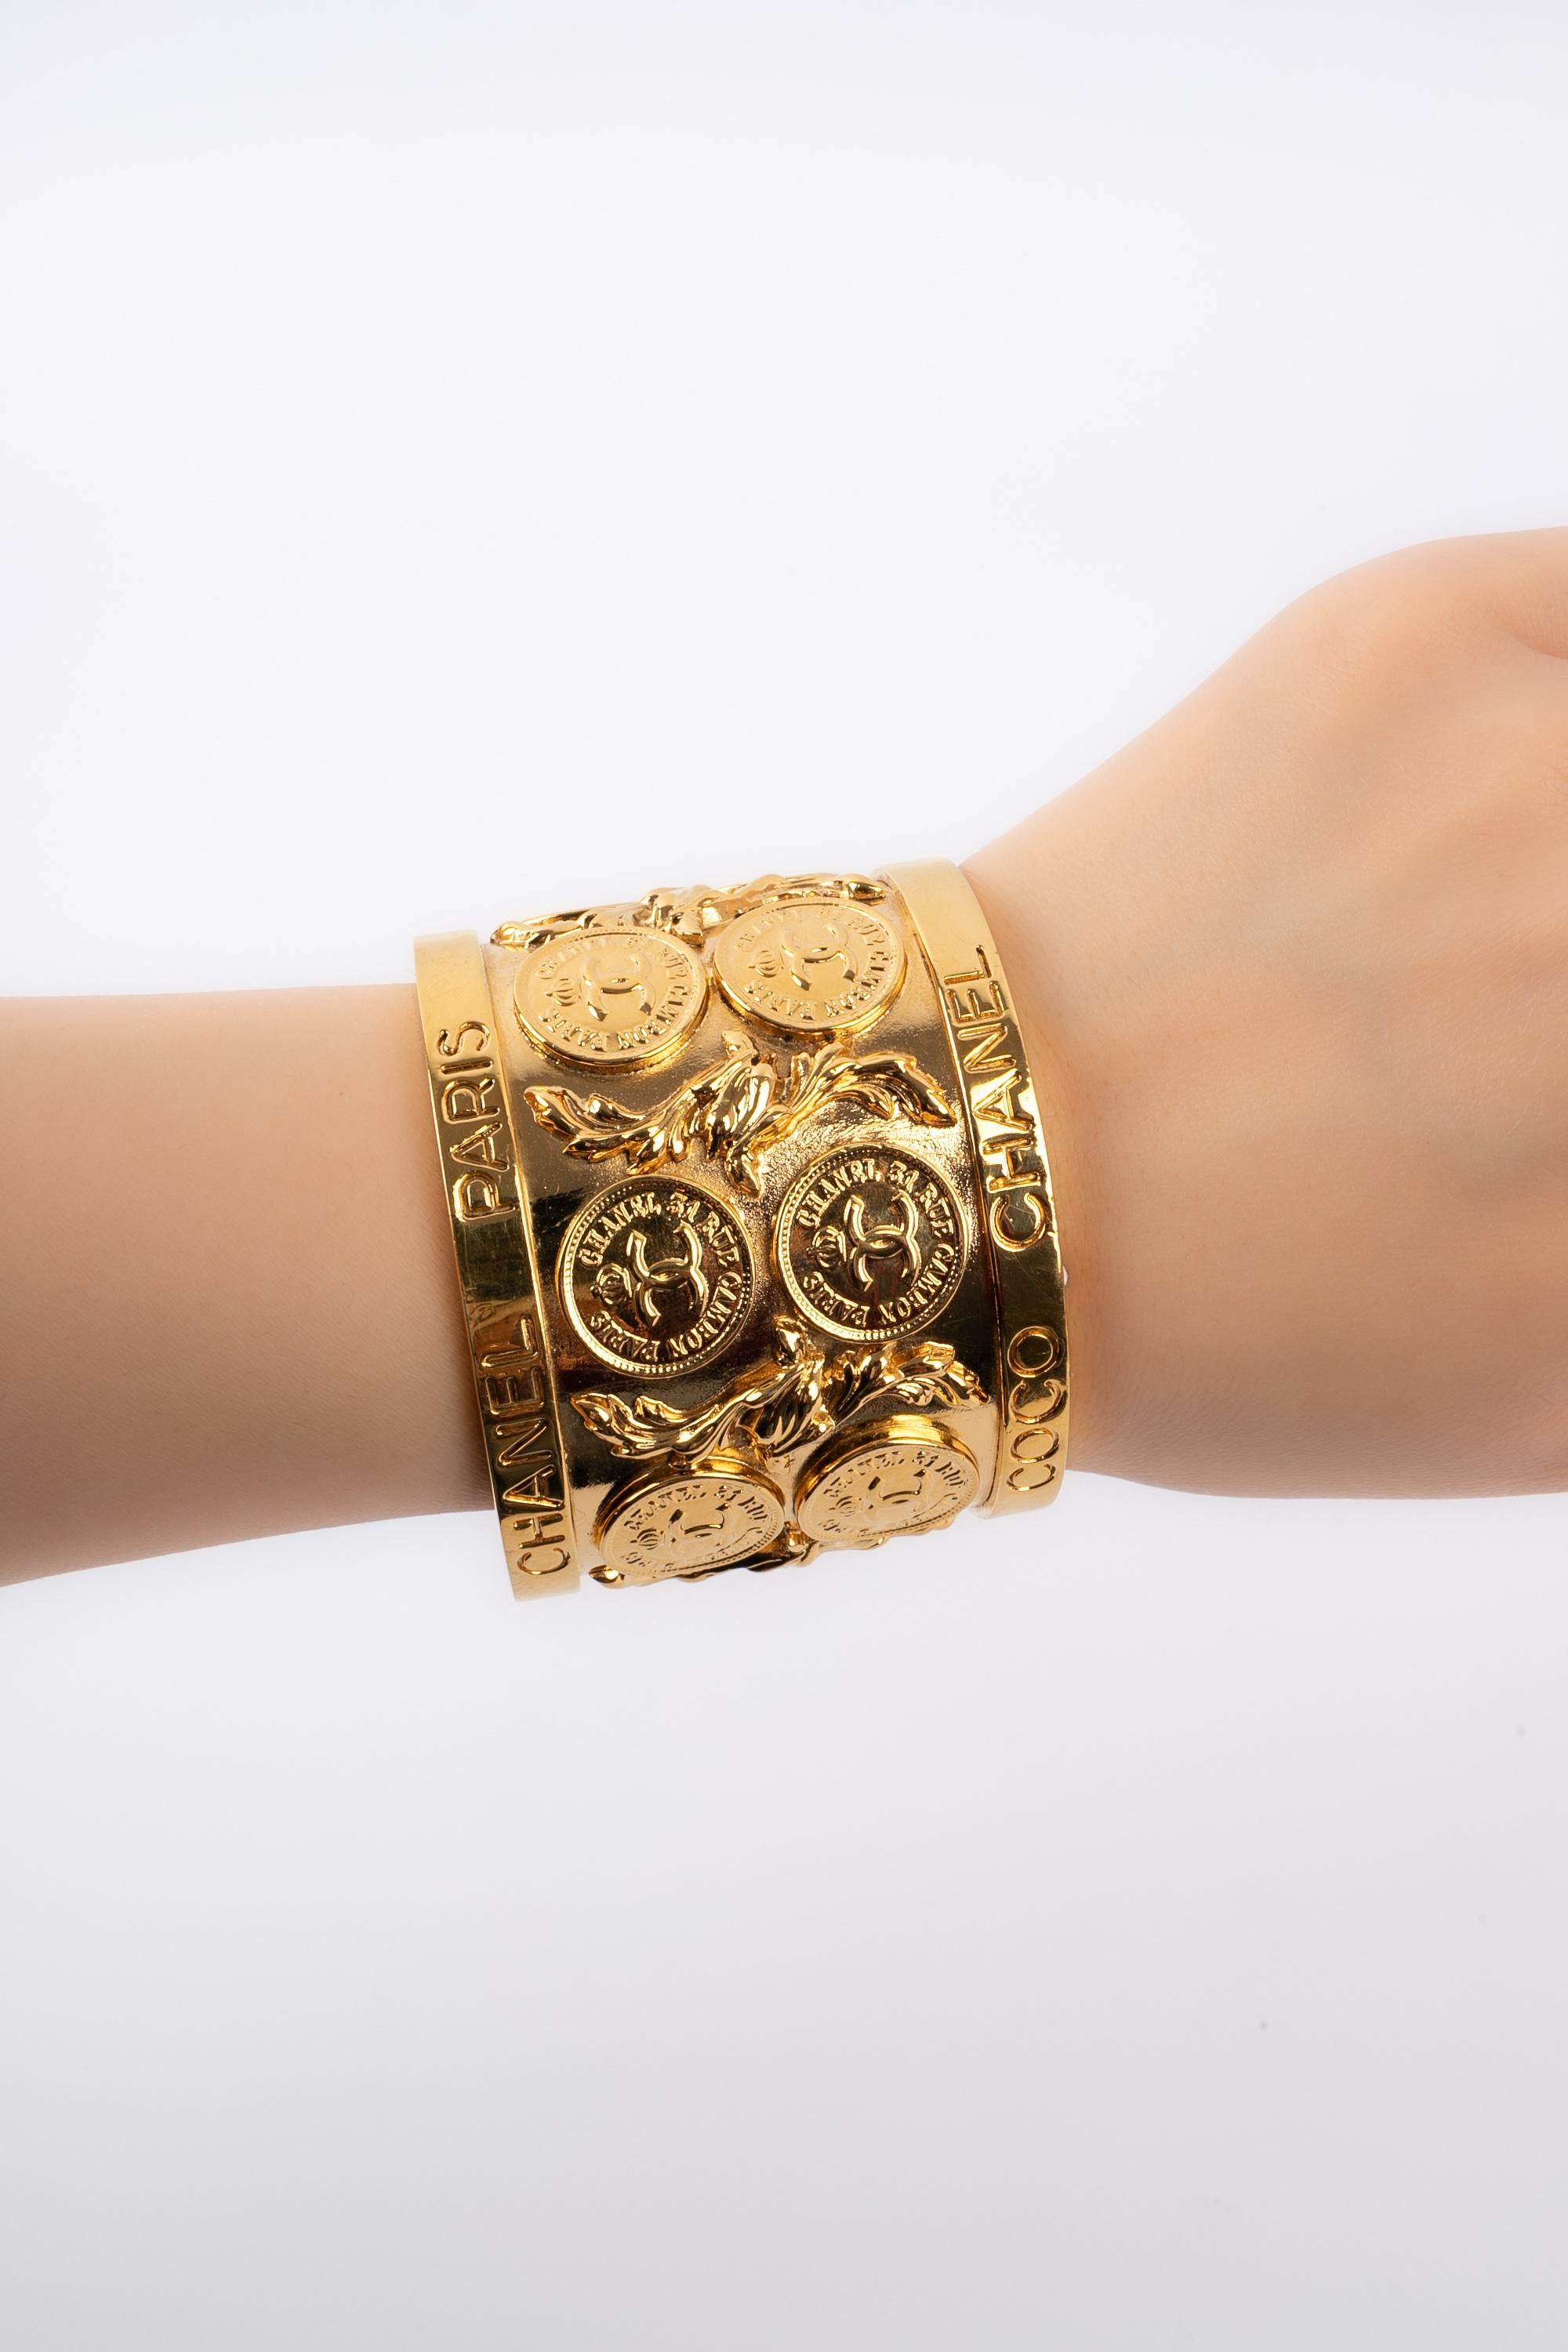 CHANEL - (Made in France) Golden metal cuff bracelet ornamented with coins. Jewelry from the 1980s.

Condition:
Very good condition

Dimensions:
Circumference: 14 cm - Opening: 3 cm - Width: 5.5 cm

BRAB126